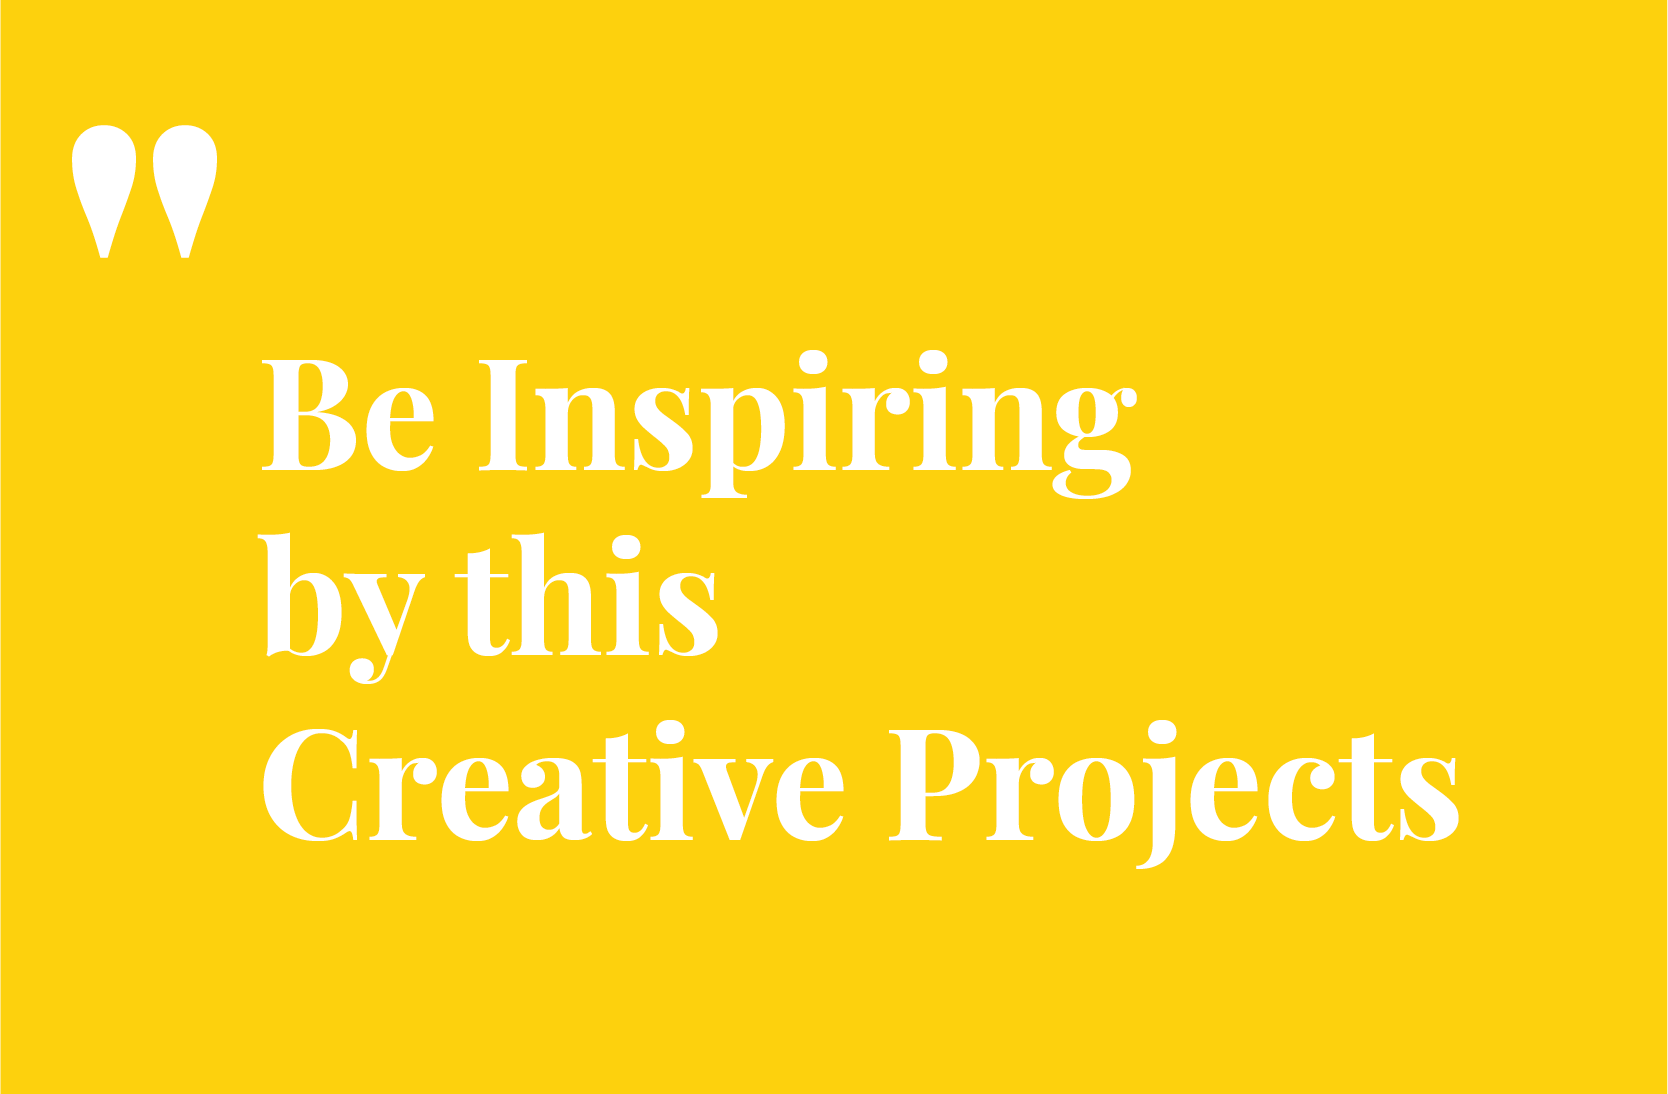 Be inspiring by this creative projects